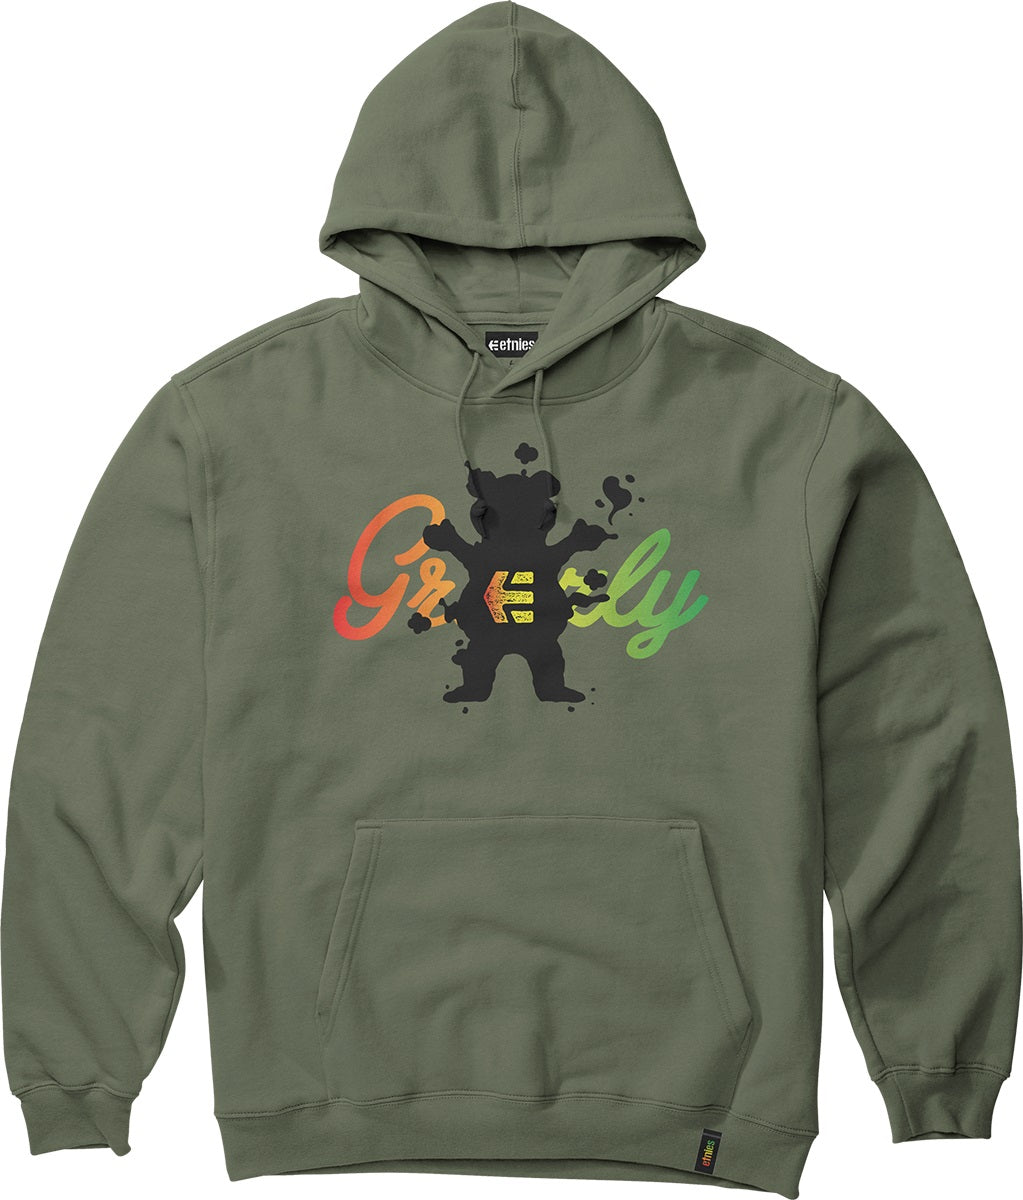 etnies x Grizzly Hoodie, Military Green